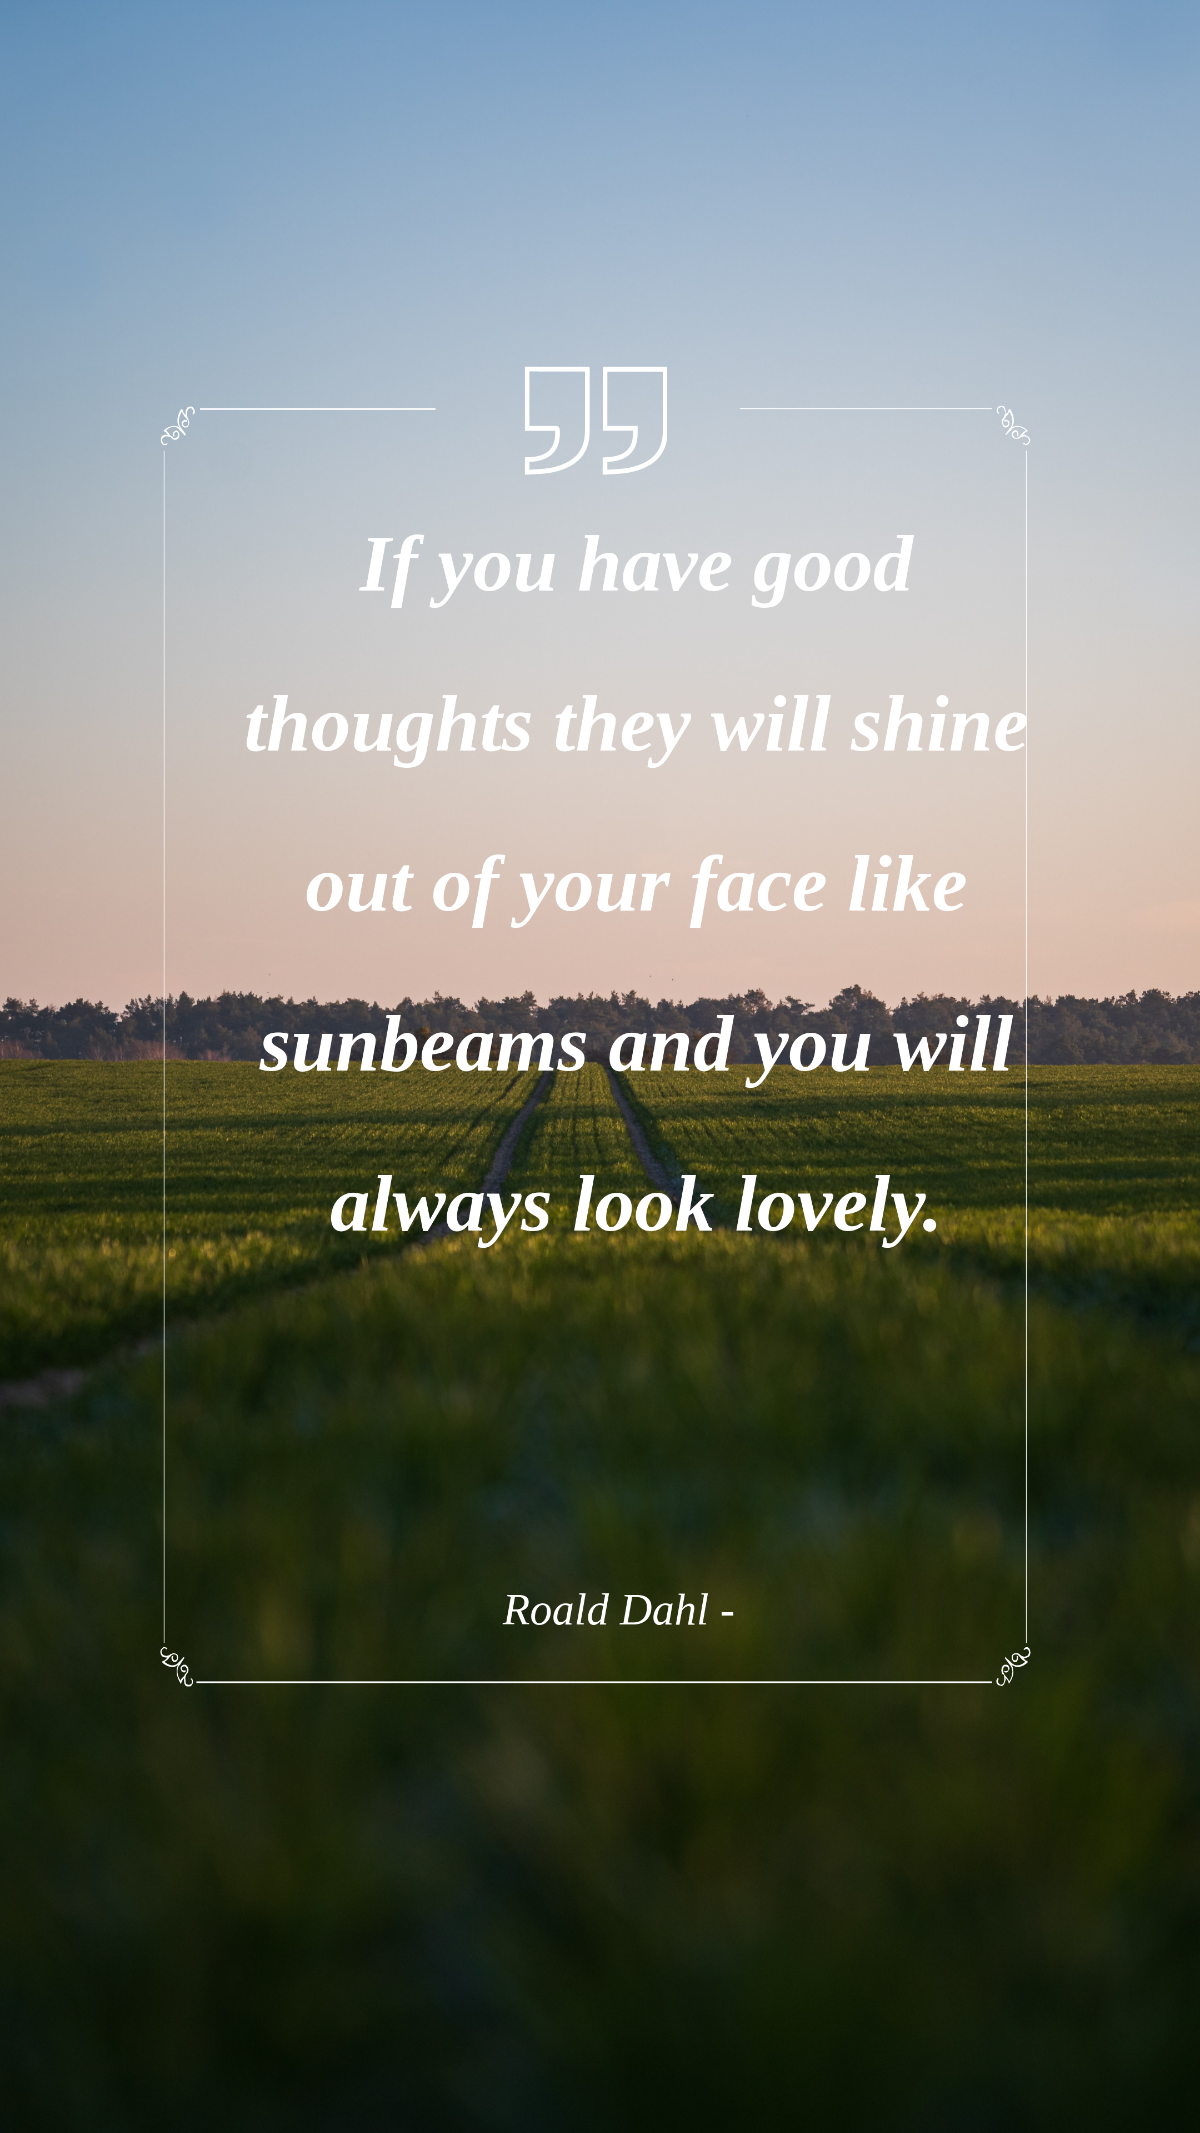 Roald Dahl - If you have good thoughts they will shine out of your face like sunbeams and you will always look lovely. Template